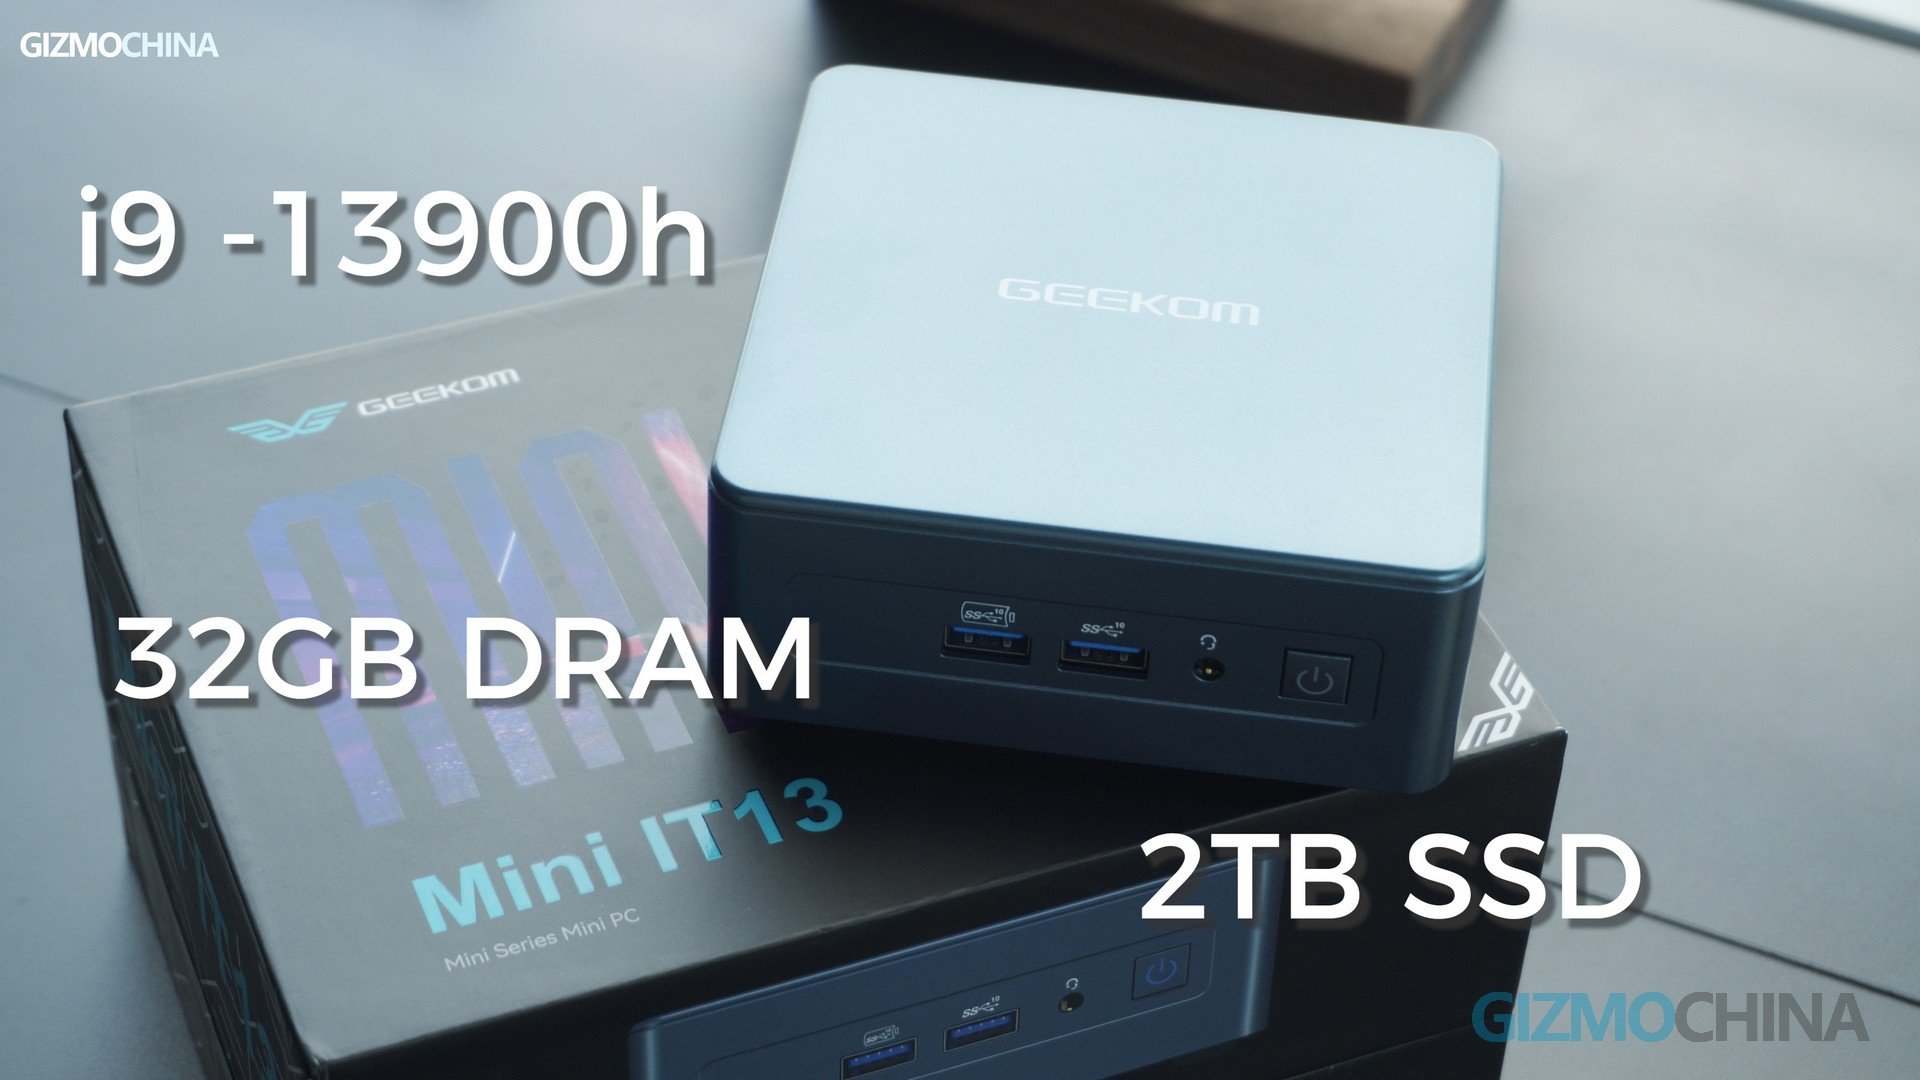 Geekom mini IT13 Review: The Most Powerful Mini PC Ever Reviewed -  Gizmochina